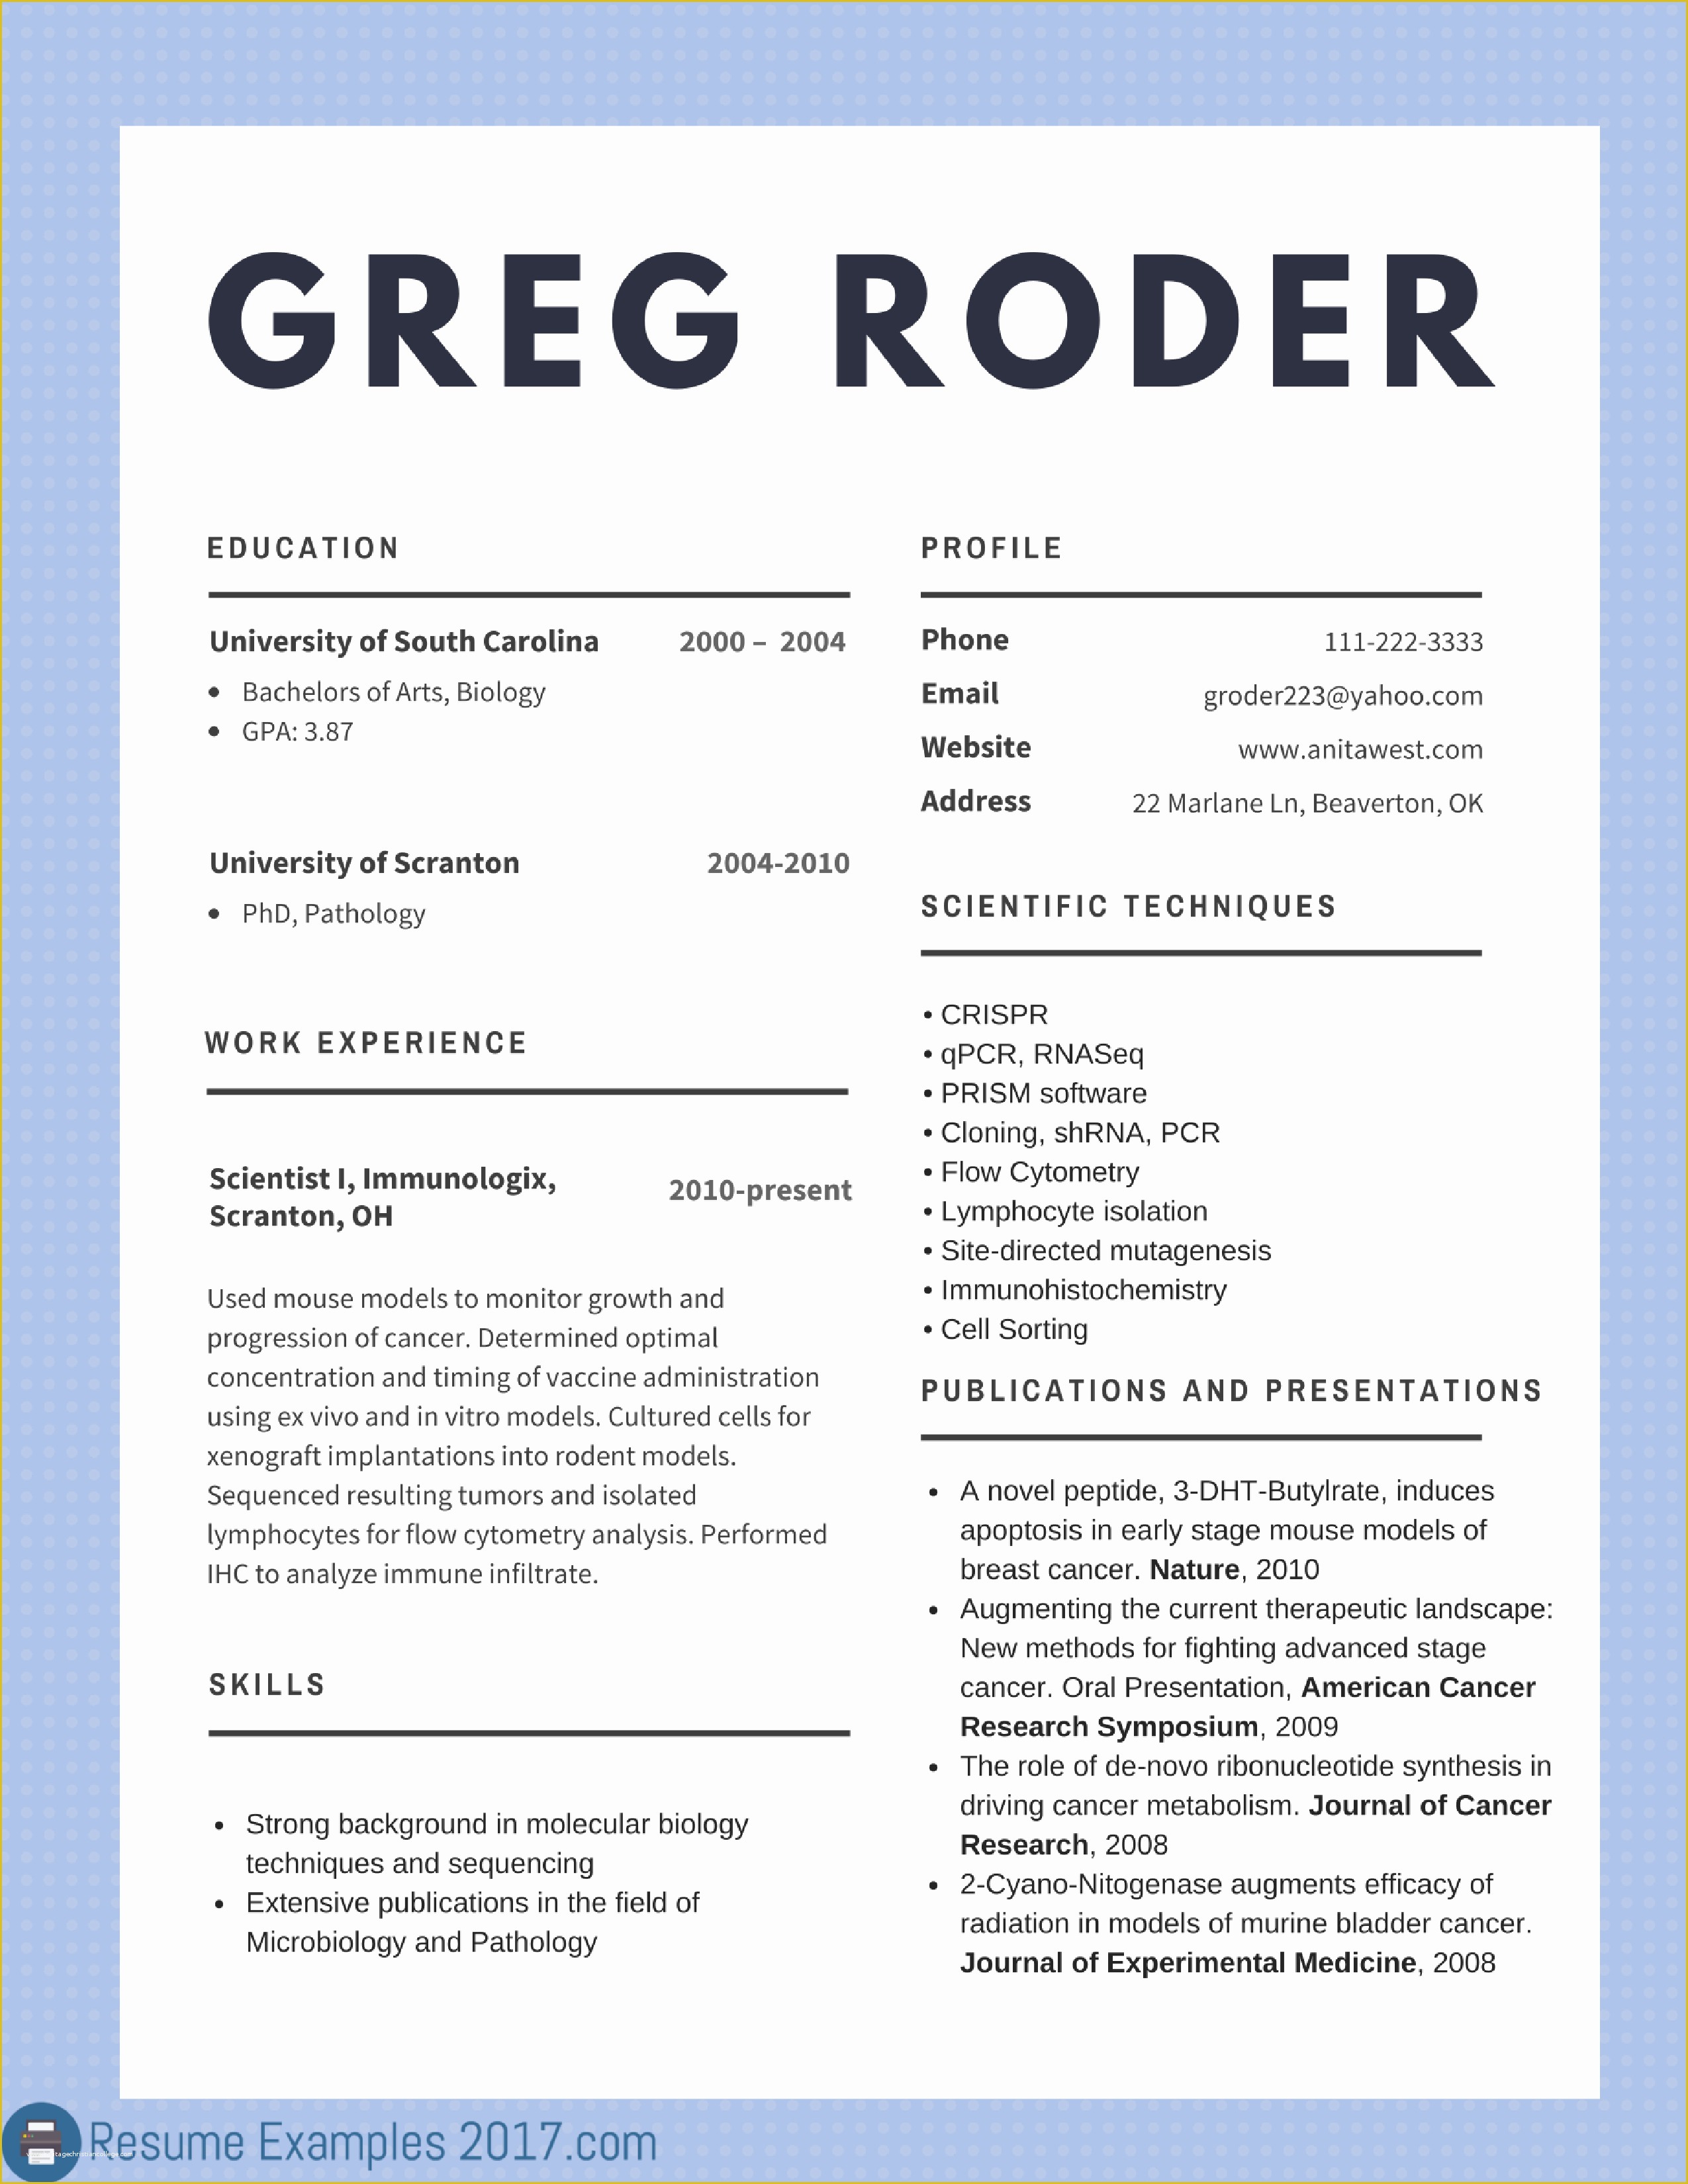 Top Free Resume Templates 2017 Of Best Cv Examples 2018 to Try